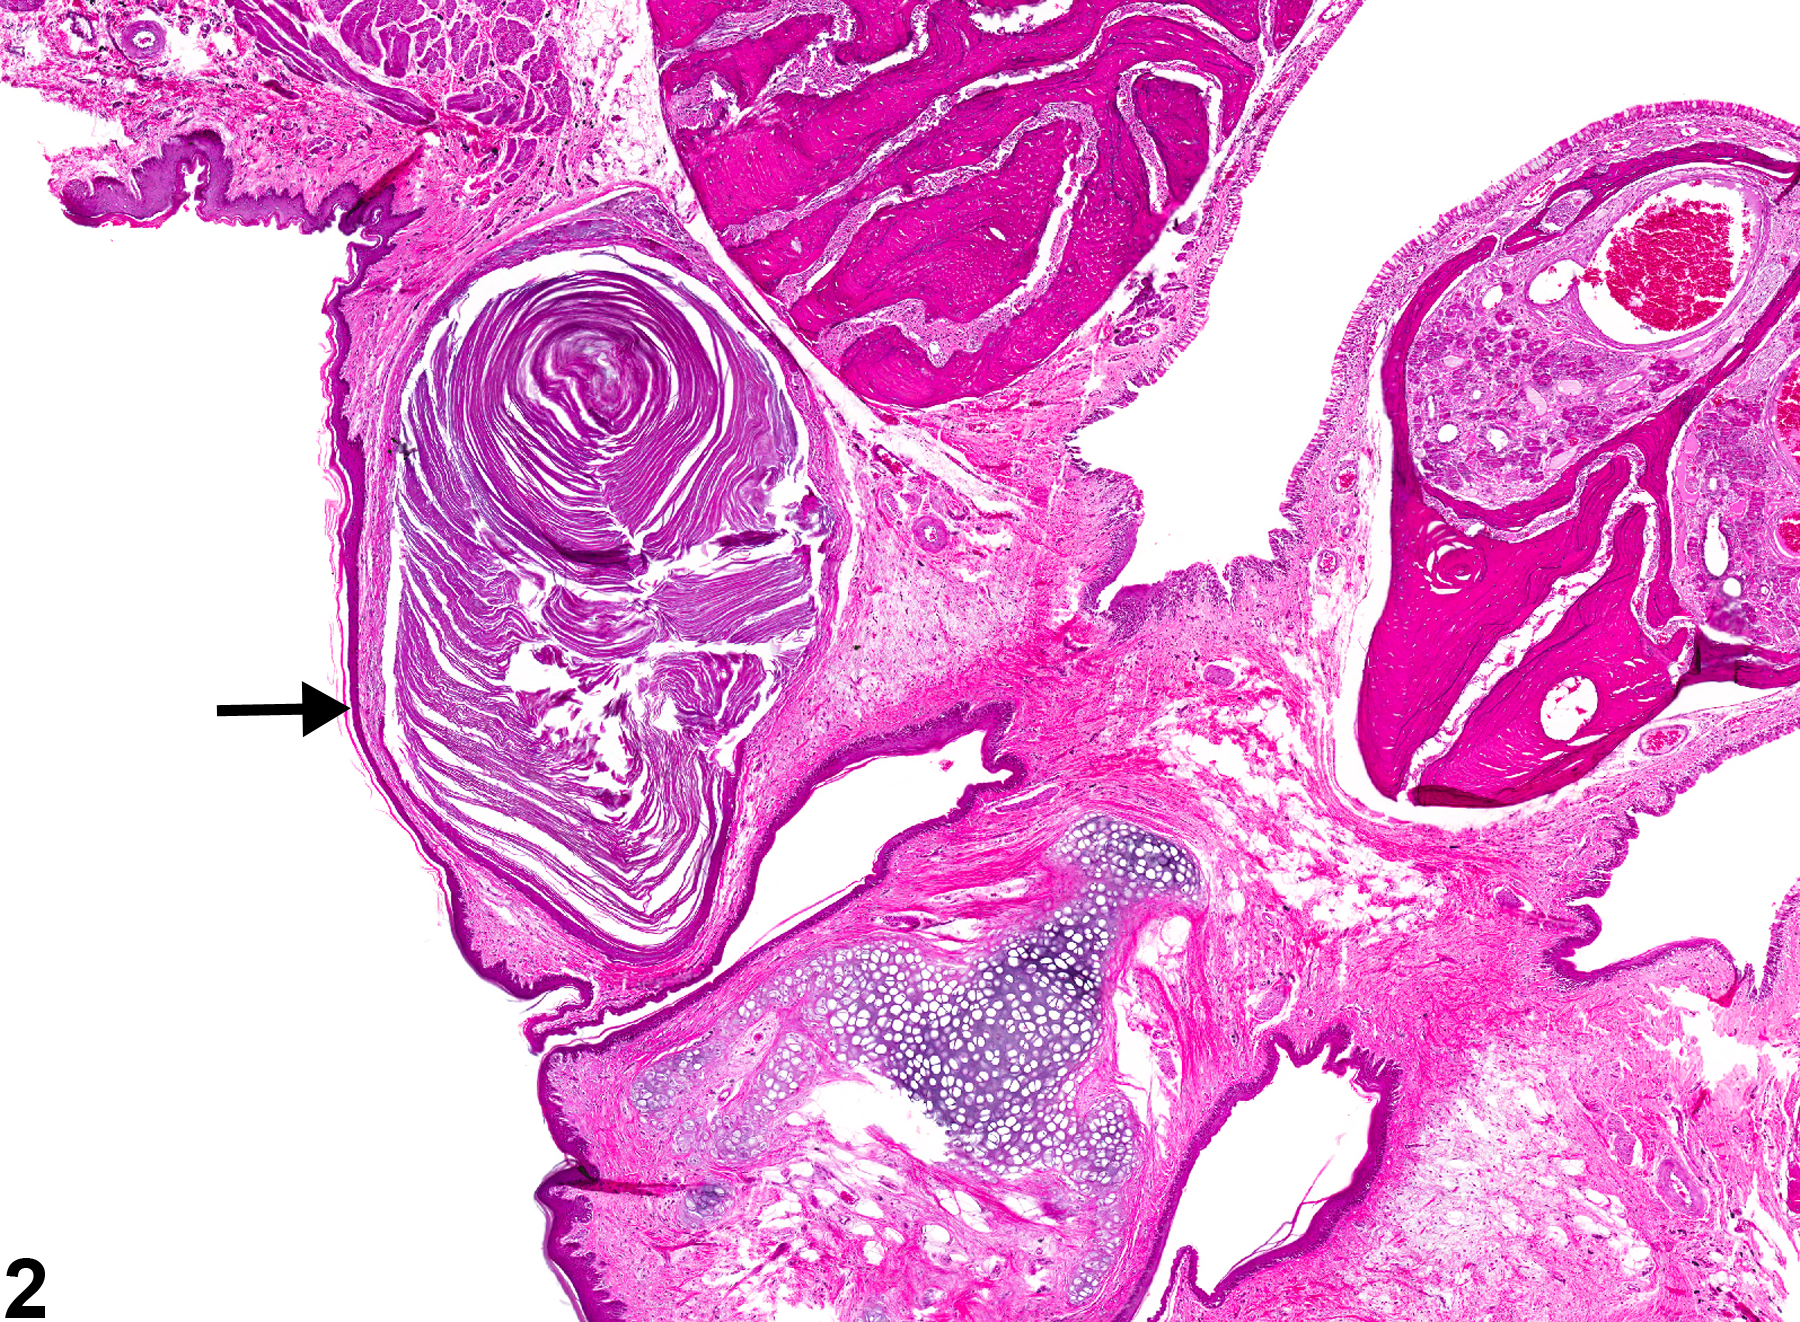 Image of cyst, squamous in the oral mucosa from a female F344/N rat in a chronic study